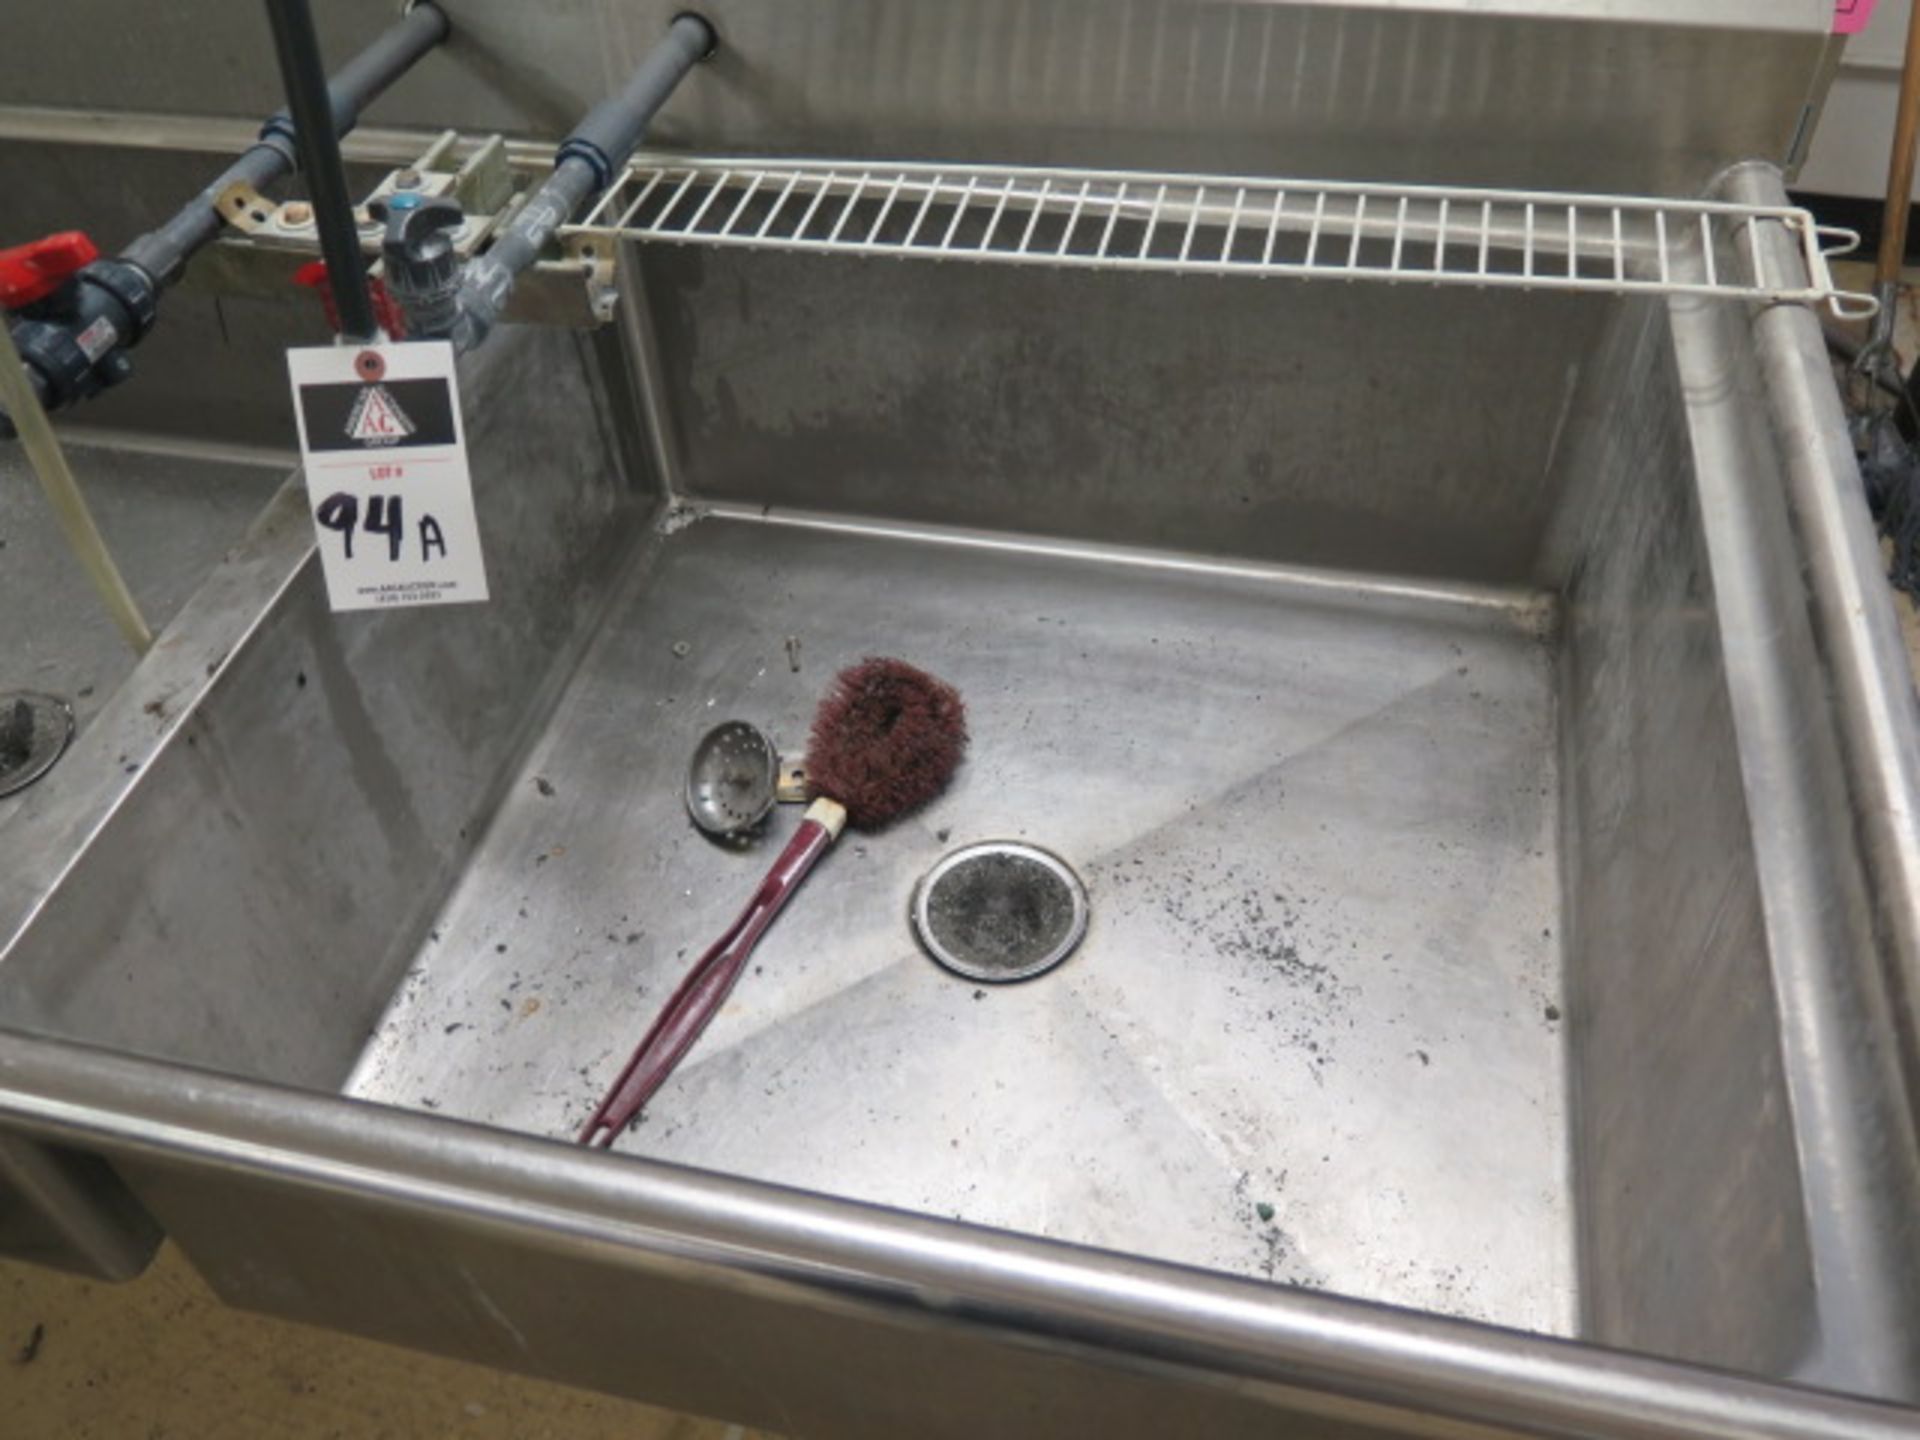 Stainless Steel Sink - Image 3 of 3